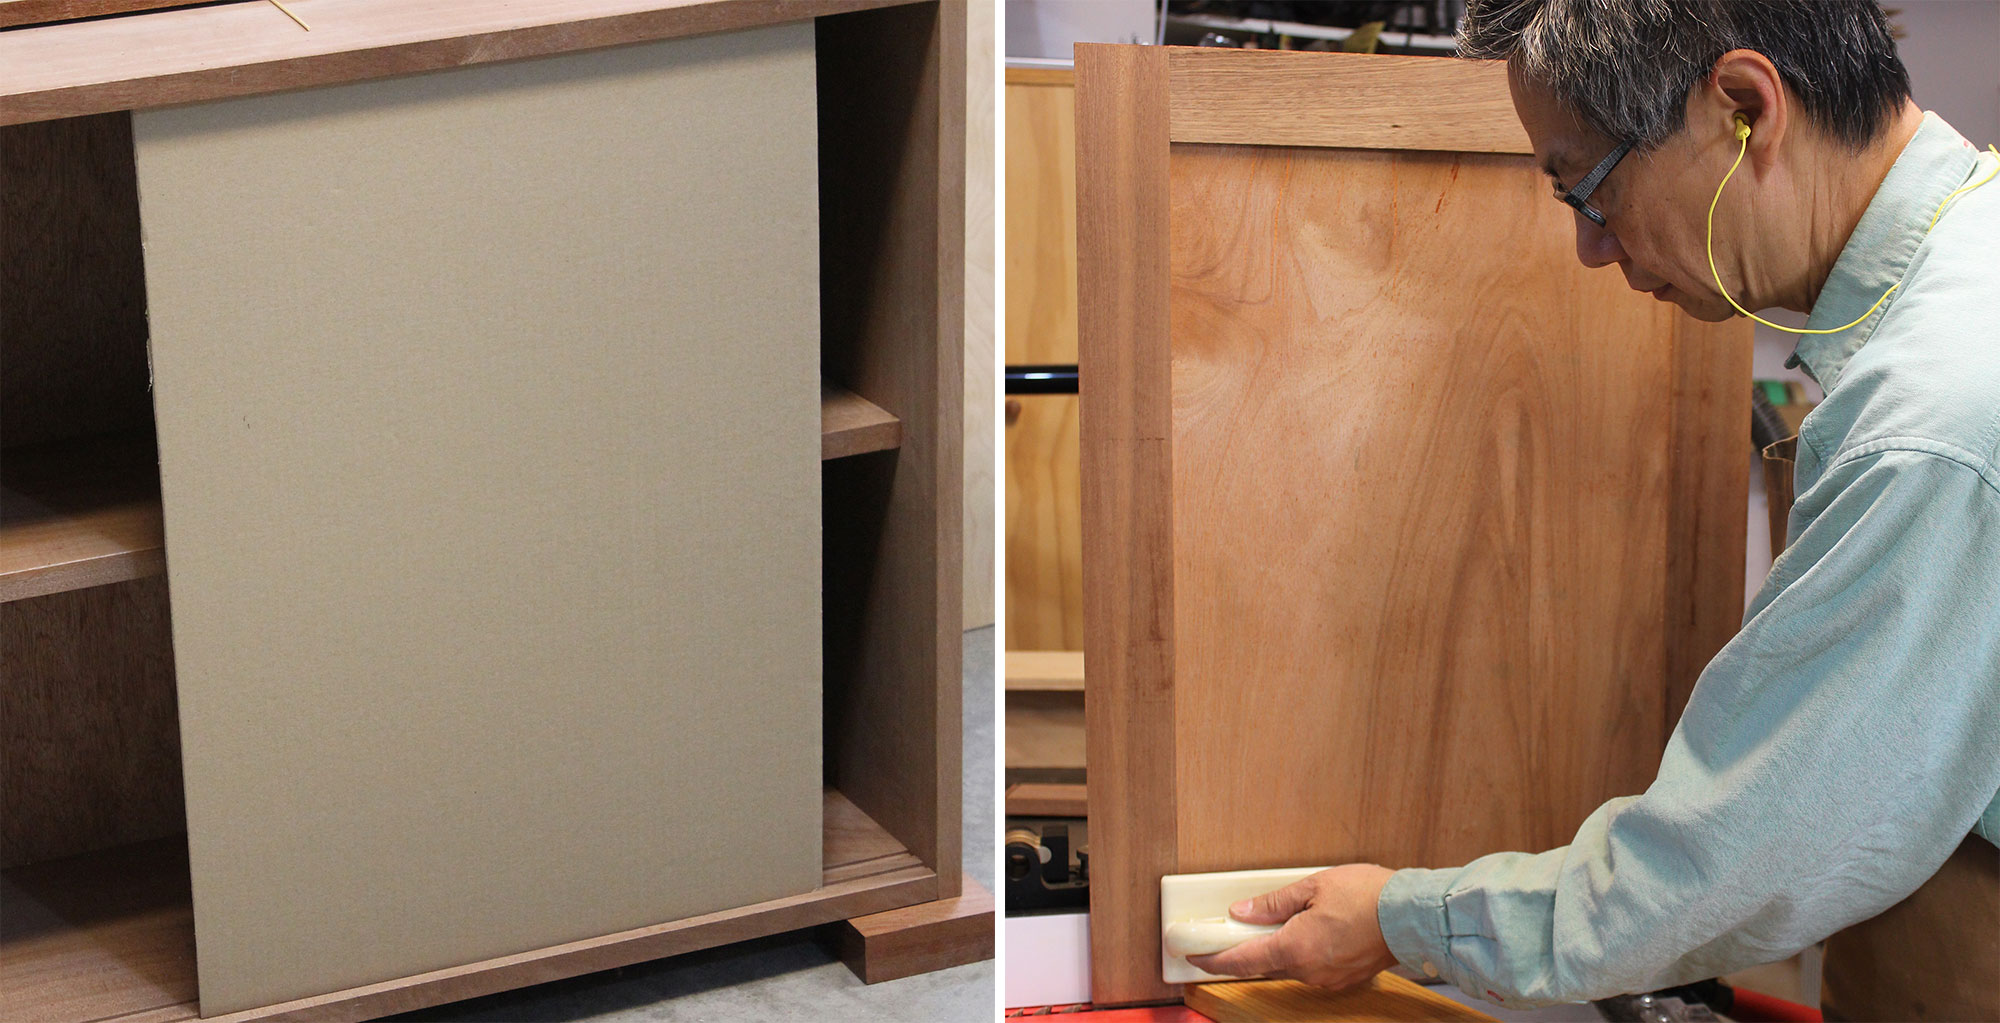 Left: Using two cardboard doors to confirm the accuracy of the author’s size calculation. Right: Trimming the doors after the mock-up exercise.